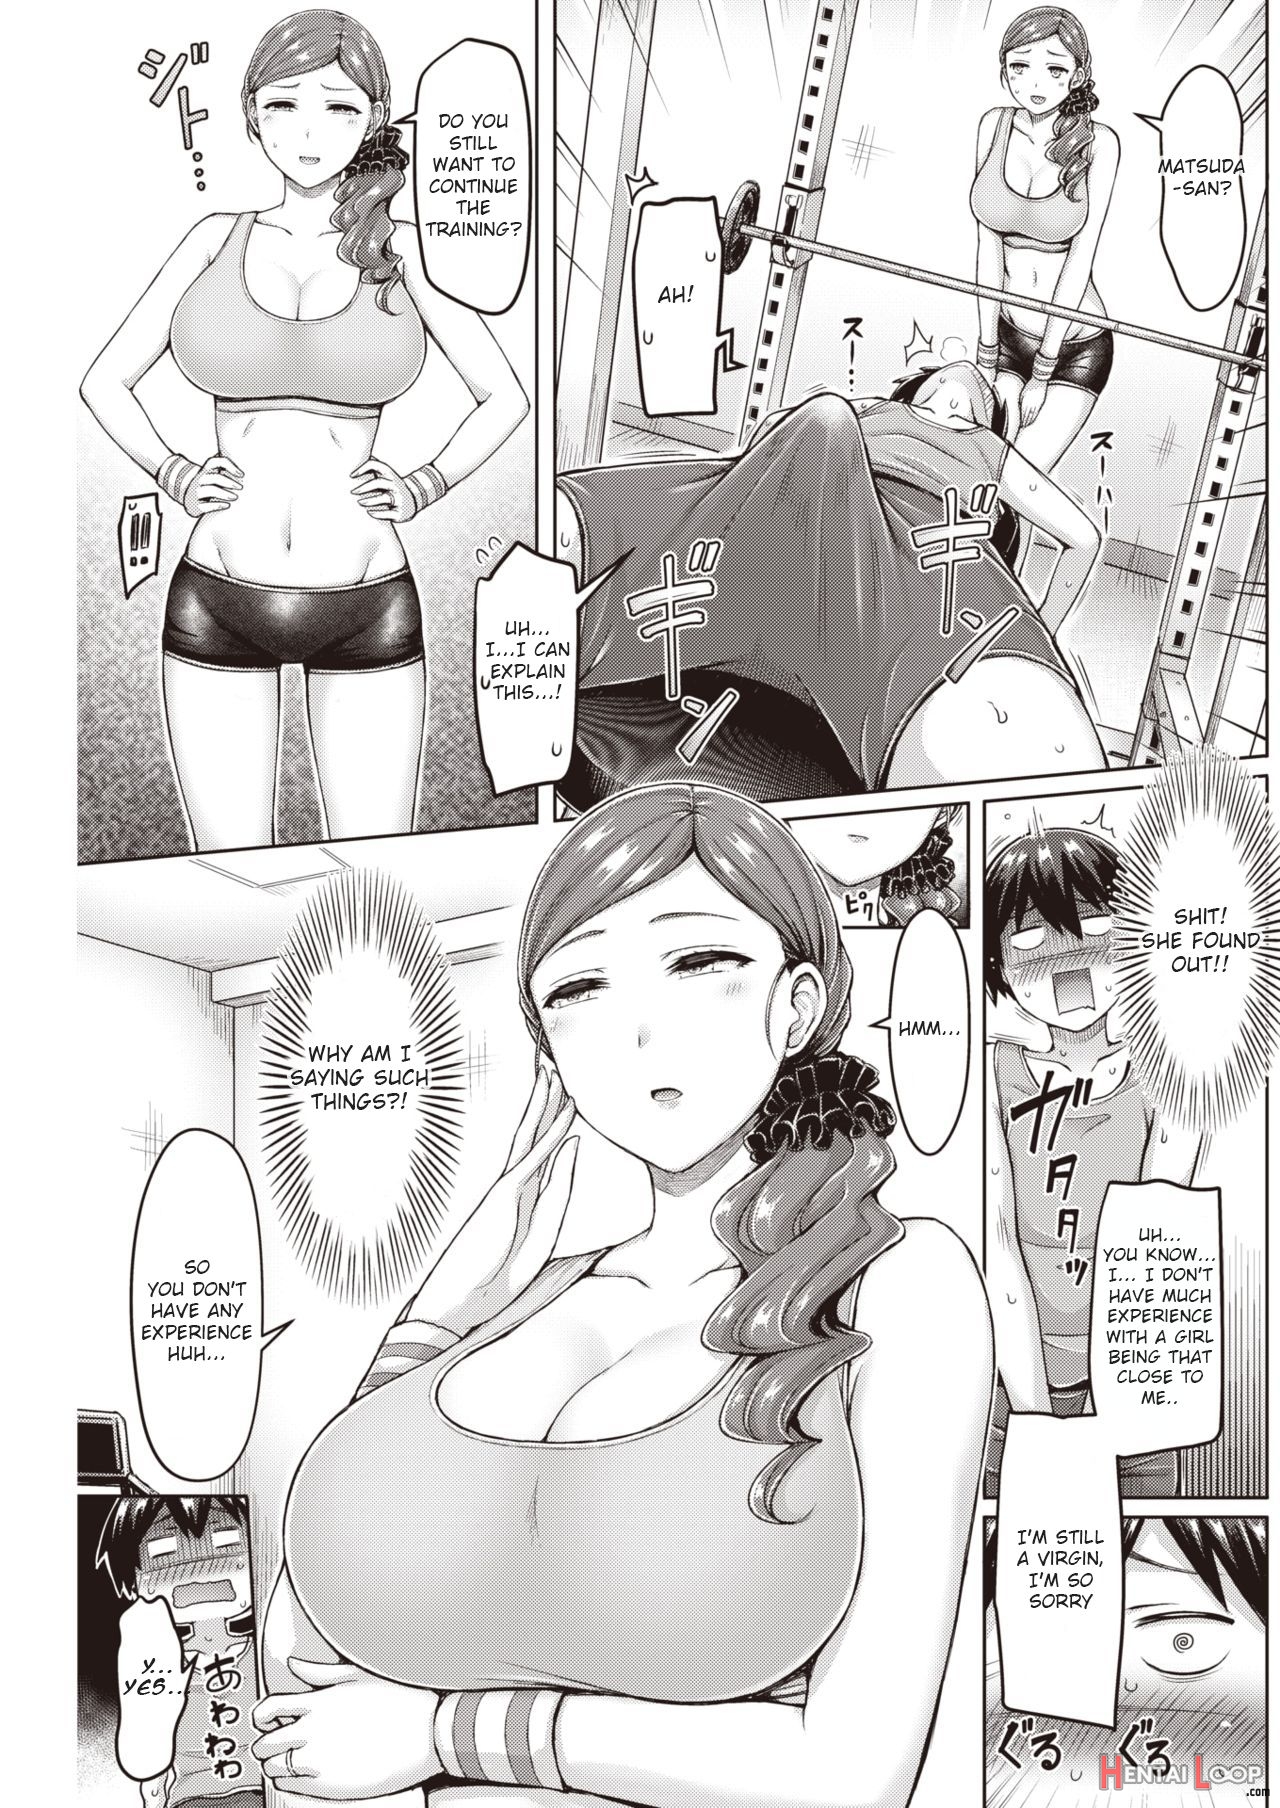 Perfect Body! page 5